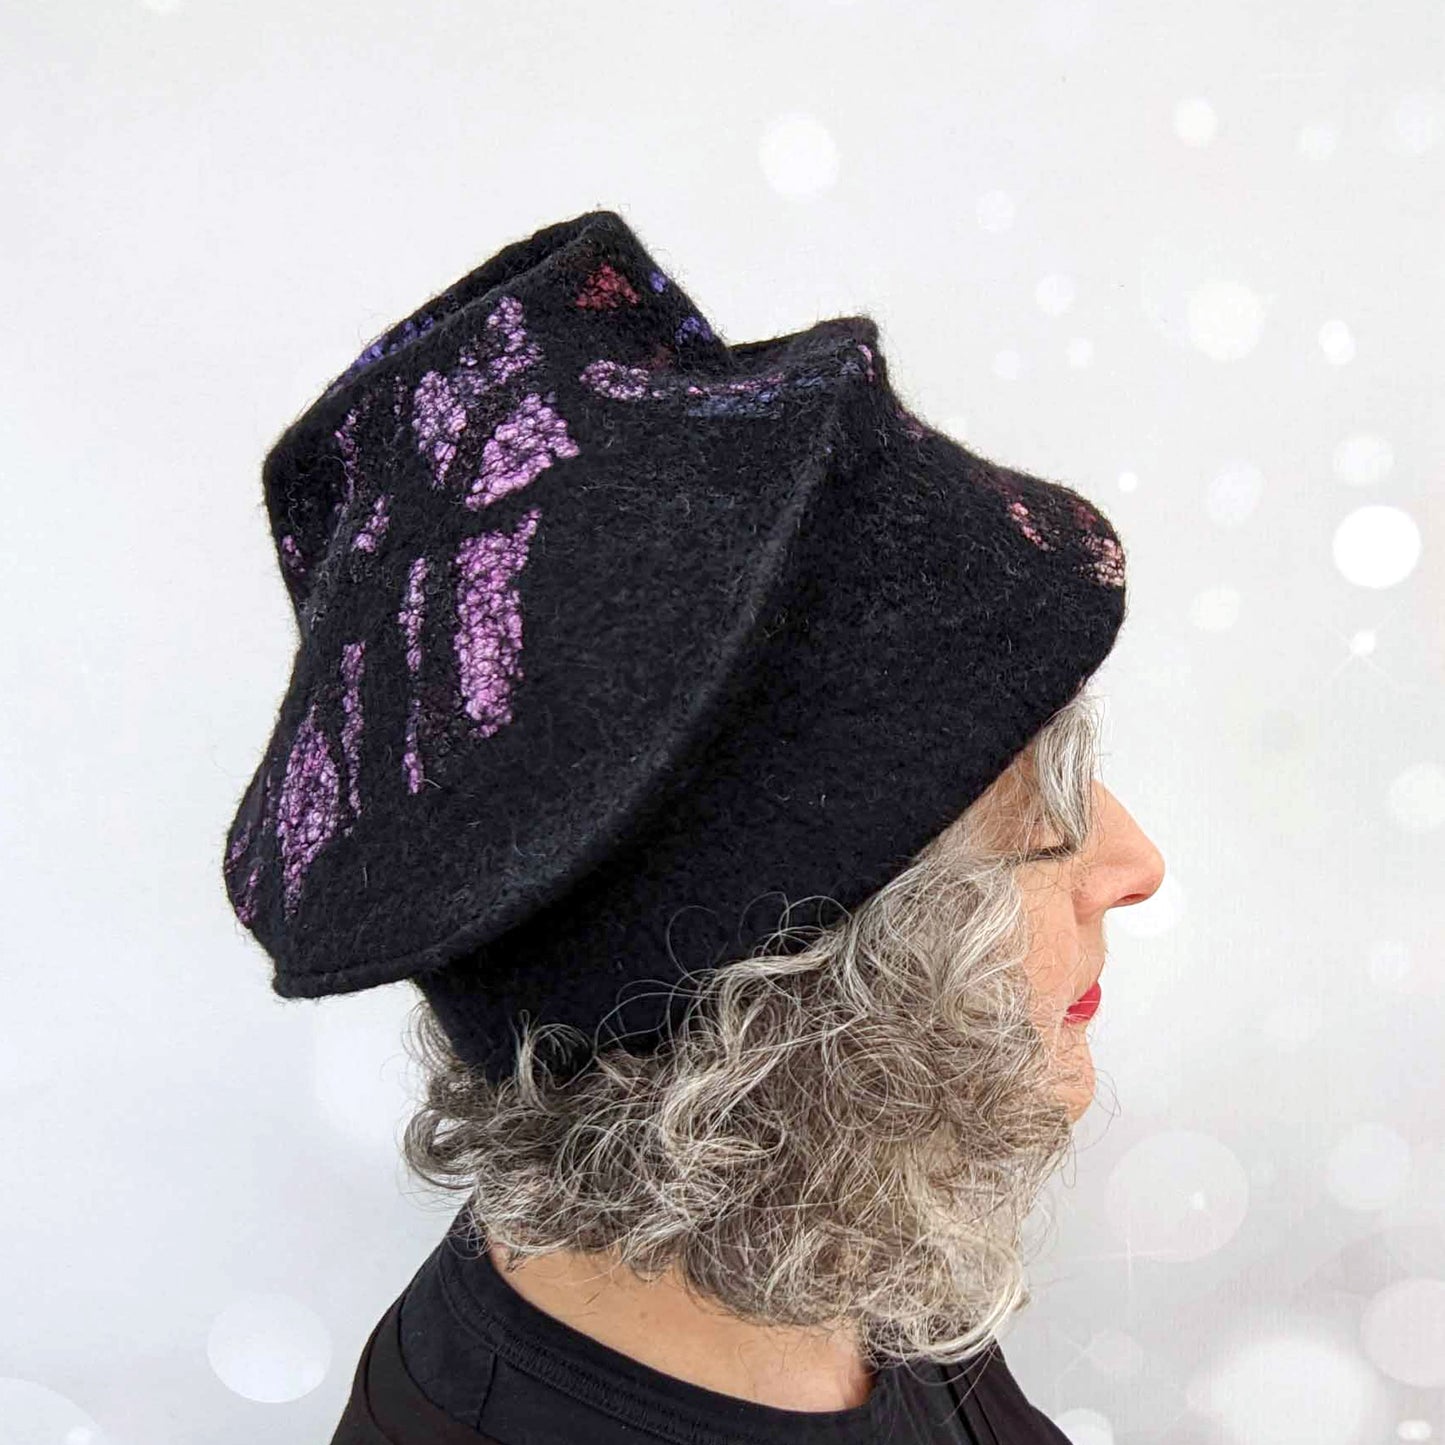 Felted Wool Toque in Black with Vibrant Stained Glass Colors - sideview